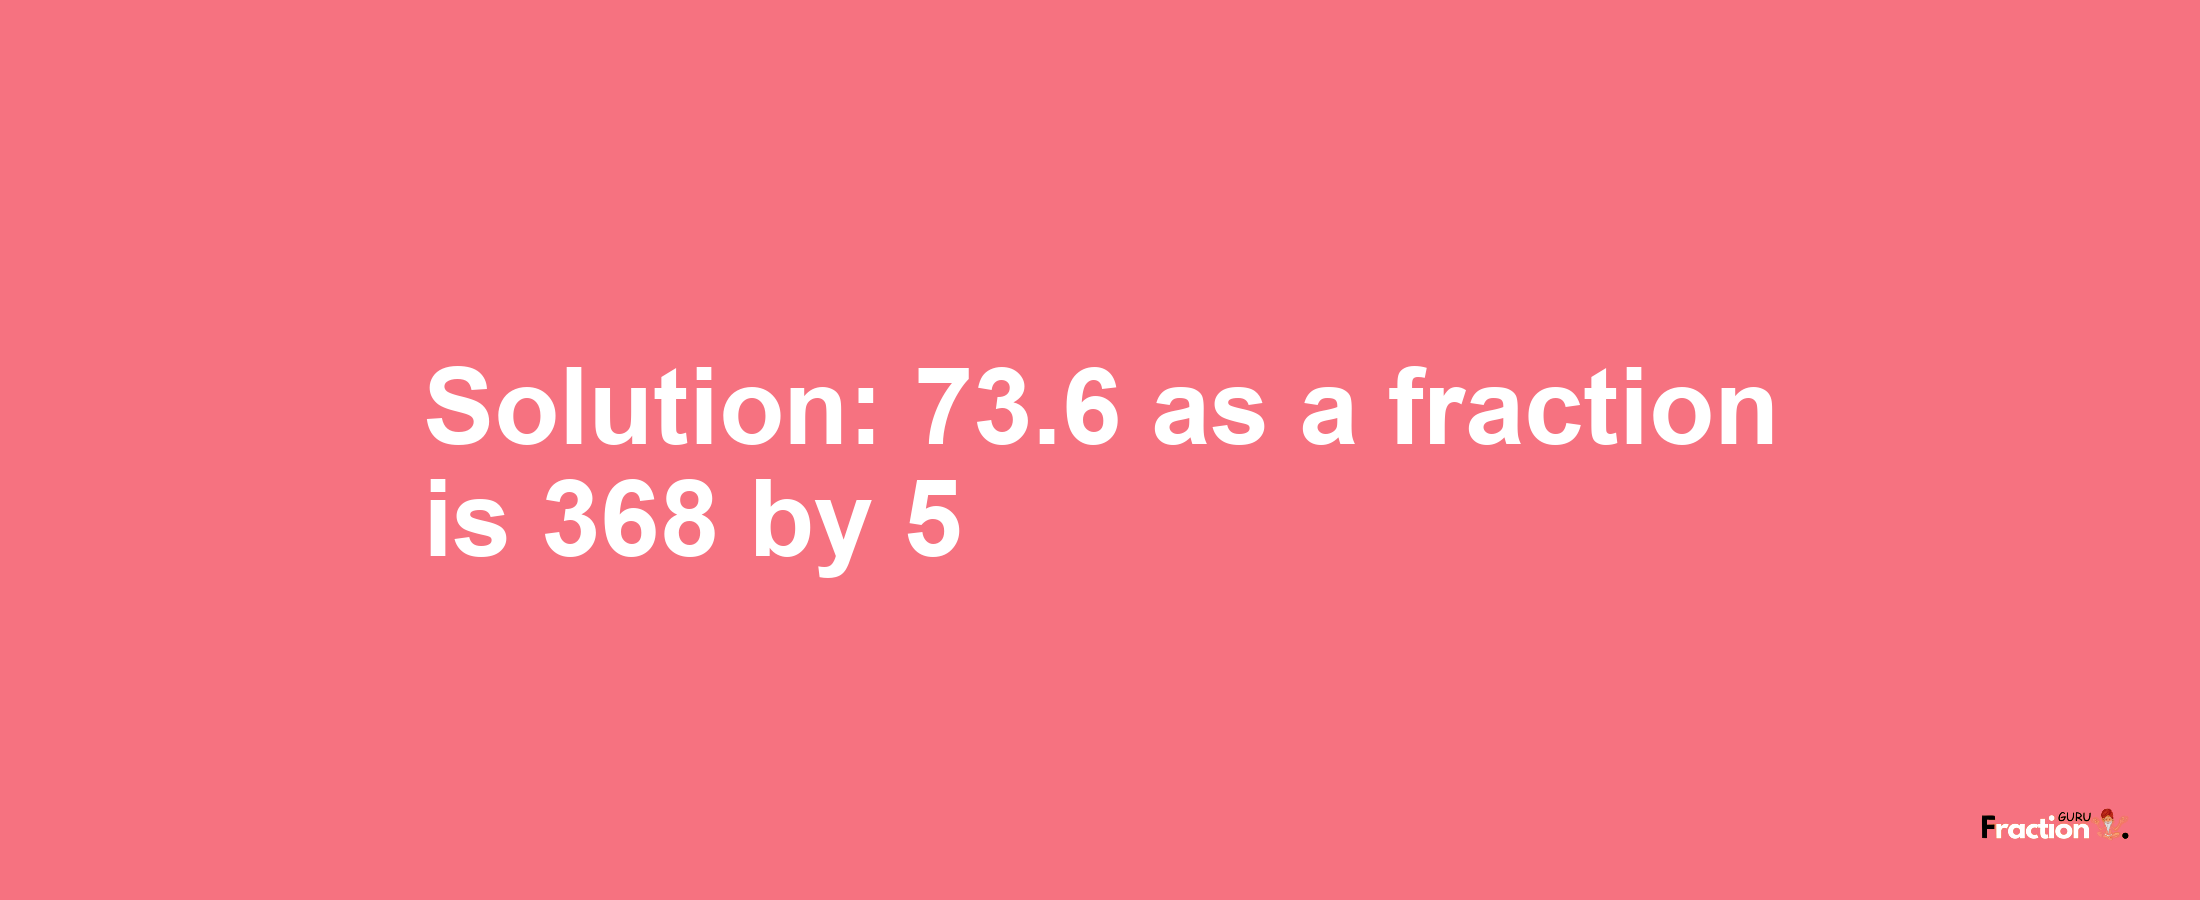 Solution:73.6 as a fraction is 368/5